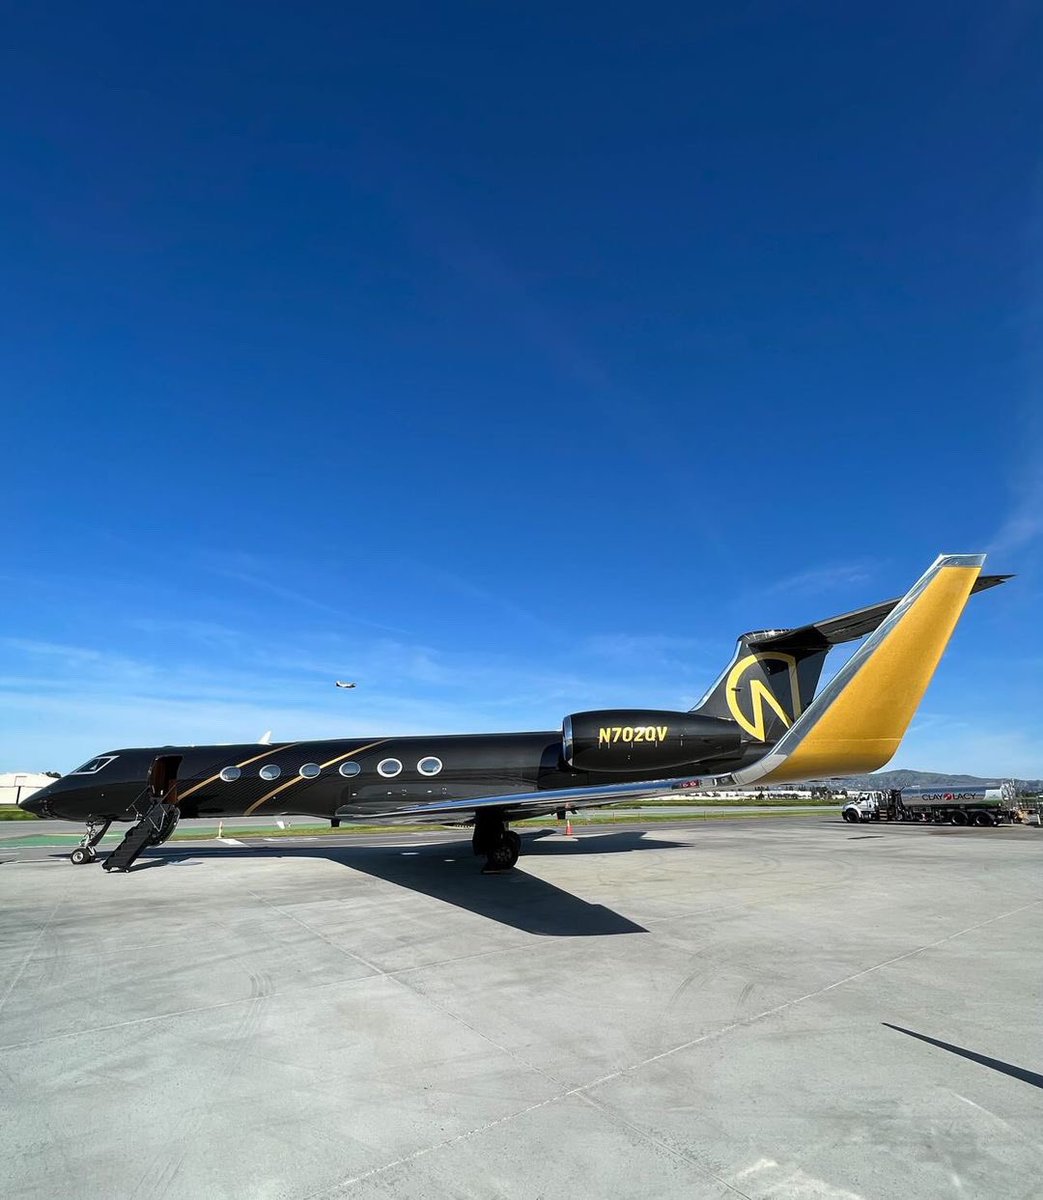 Just a beautiful day with one of our black Gulfstreams 🖤 Gulfstream GV #wingtipwednesday